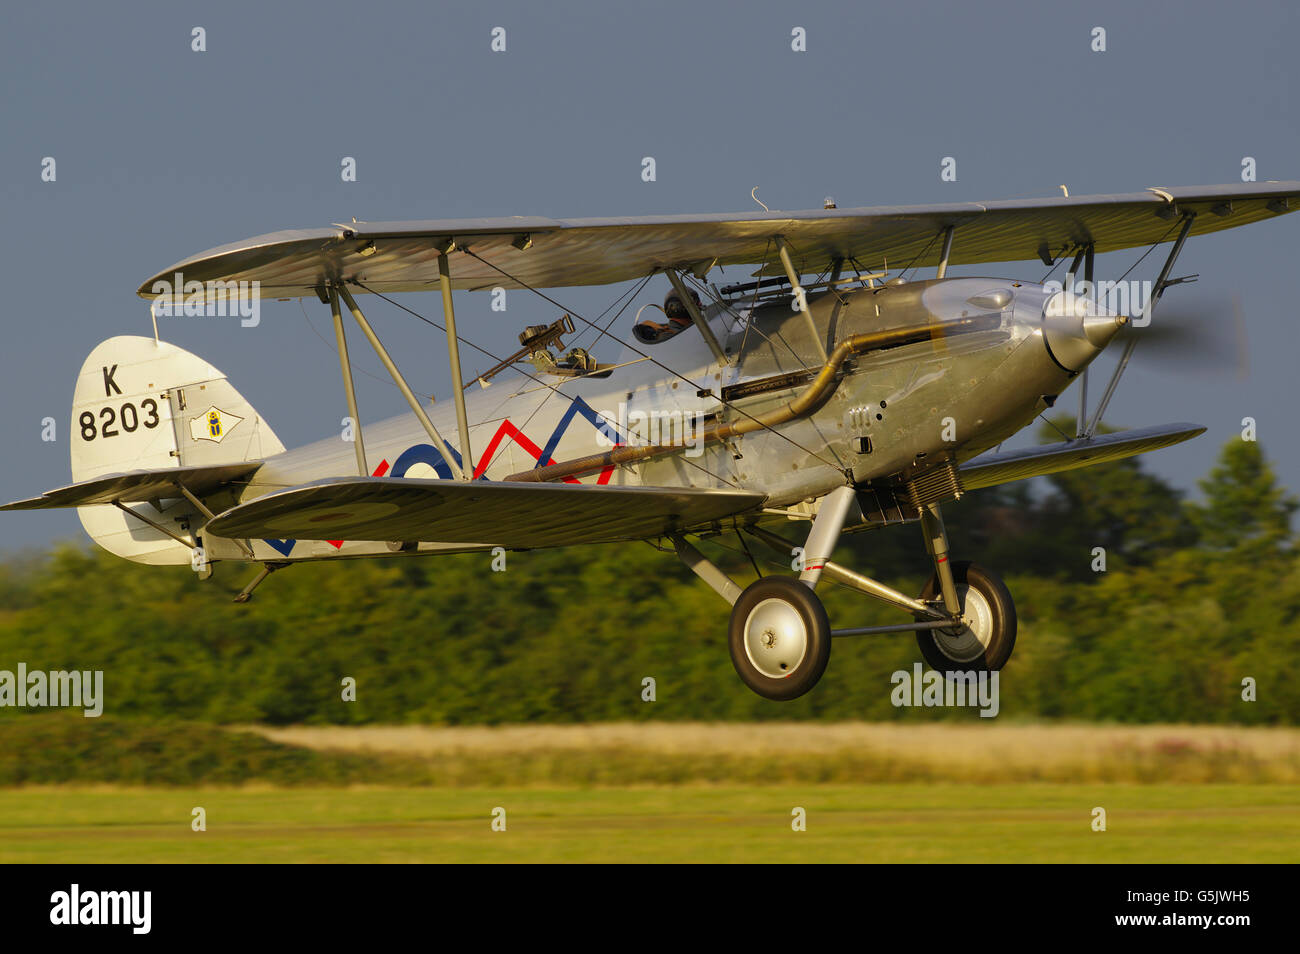 Hawker Demon K-8203, G-BTVE, at Shuttleworth Collection, Stock Photo